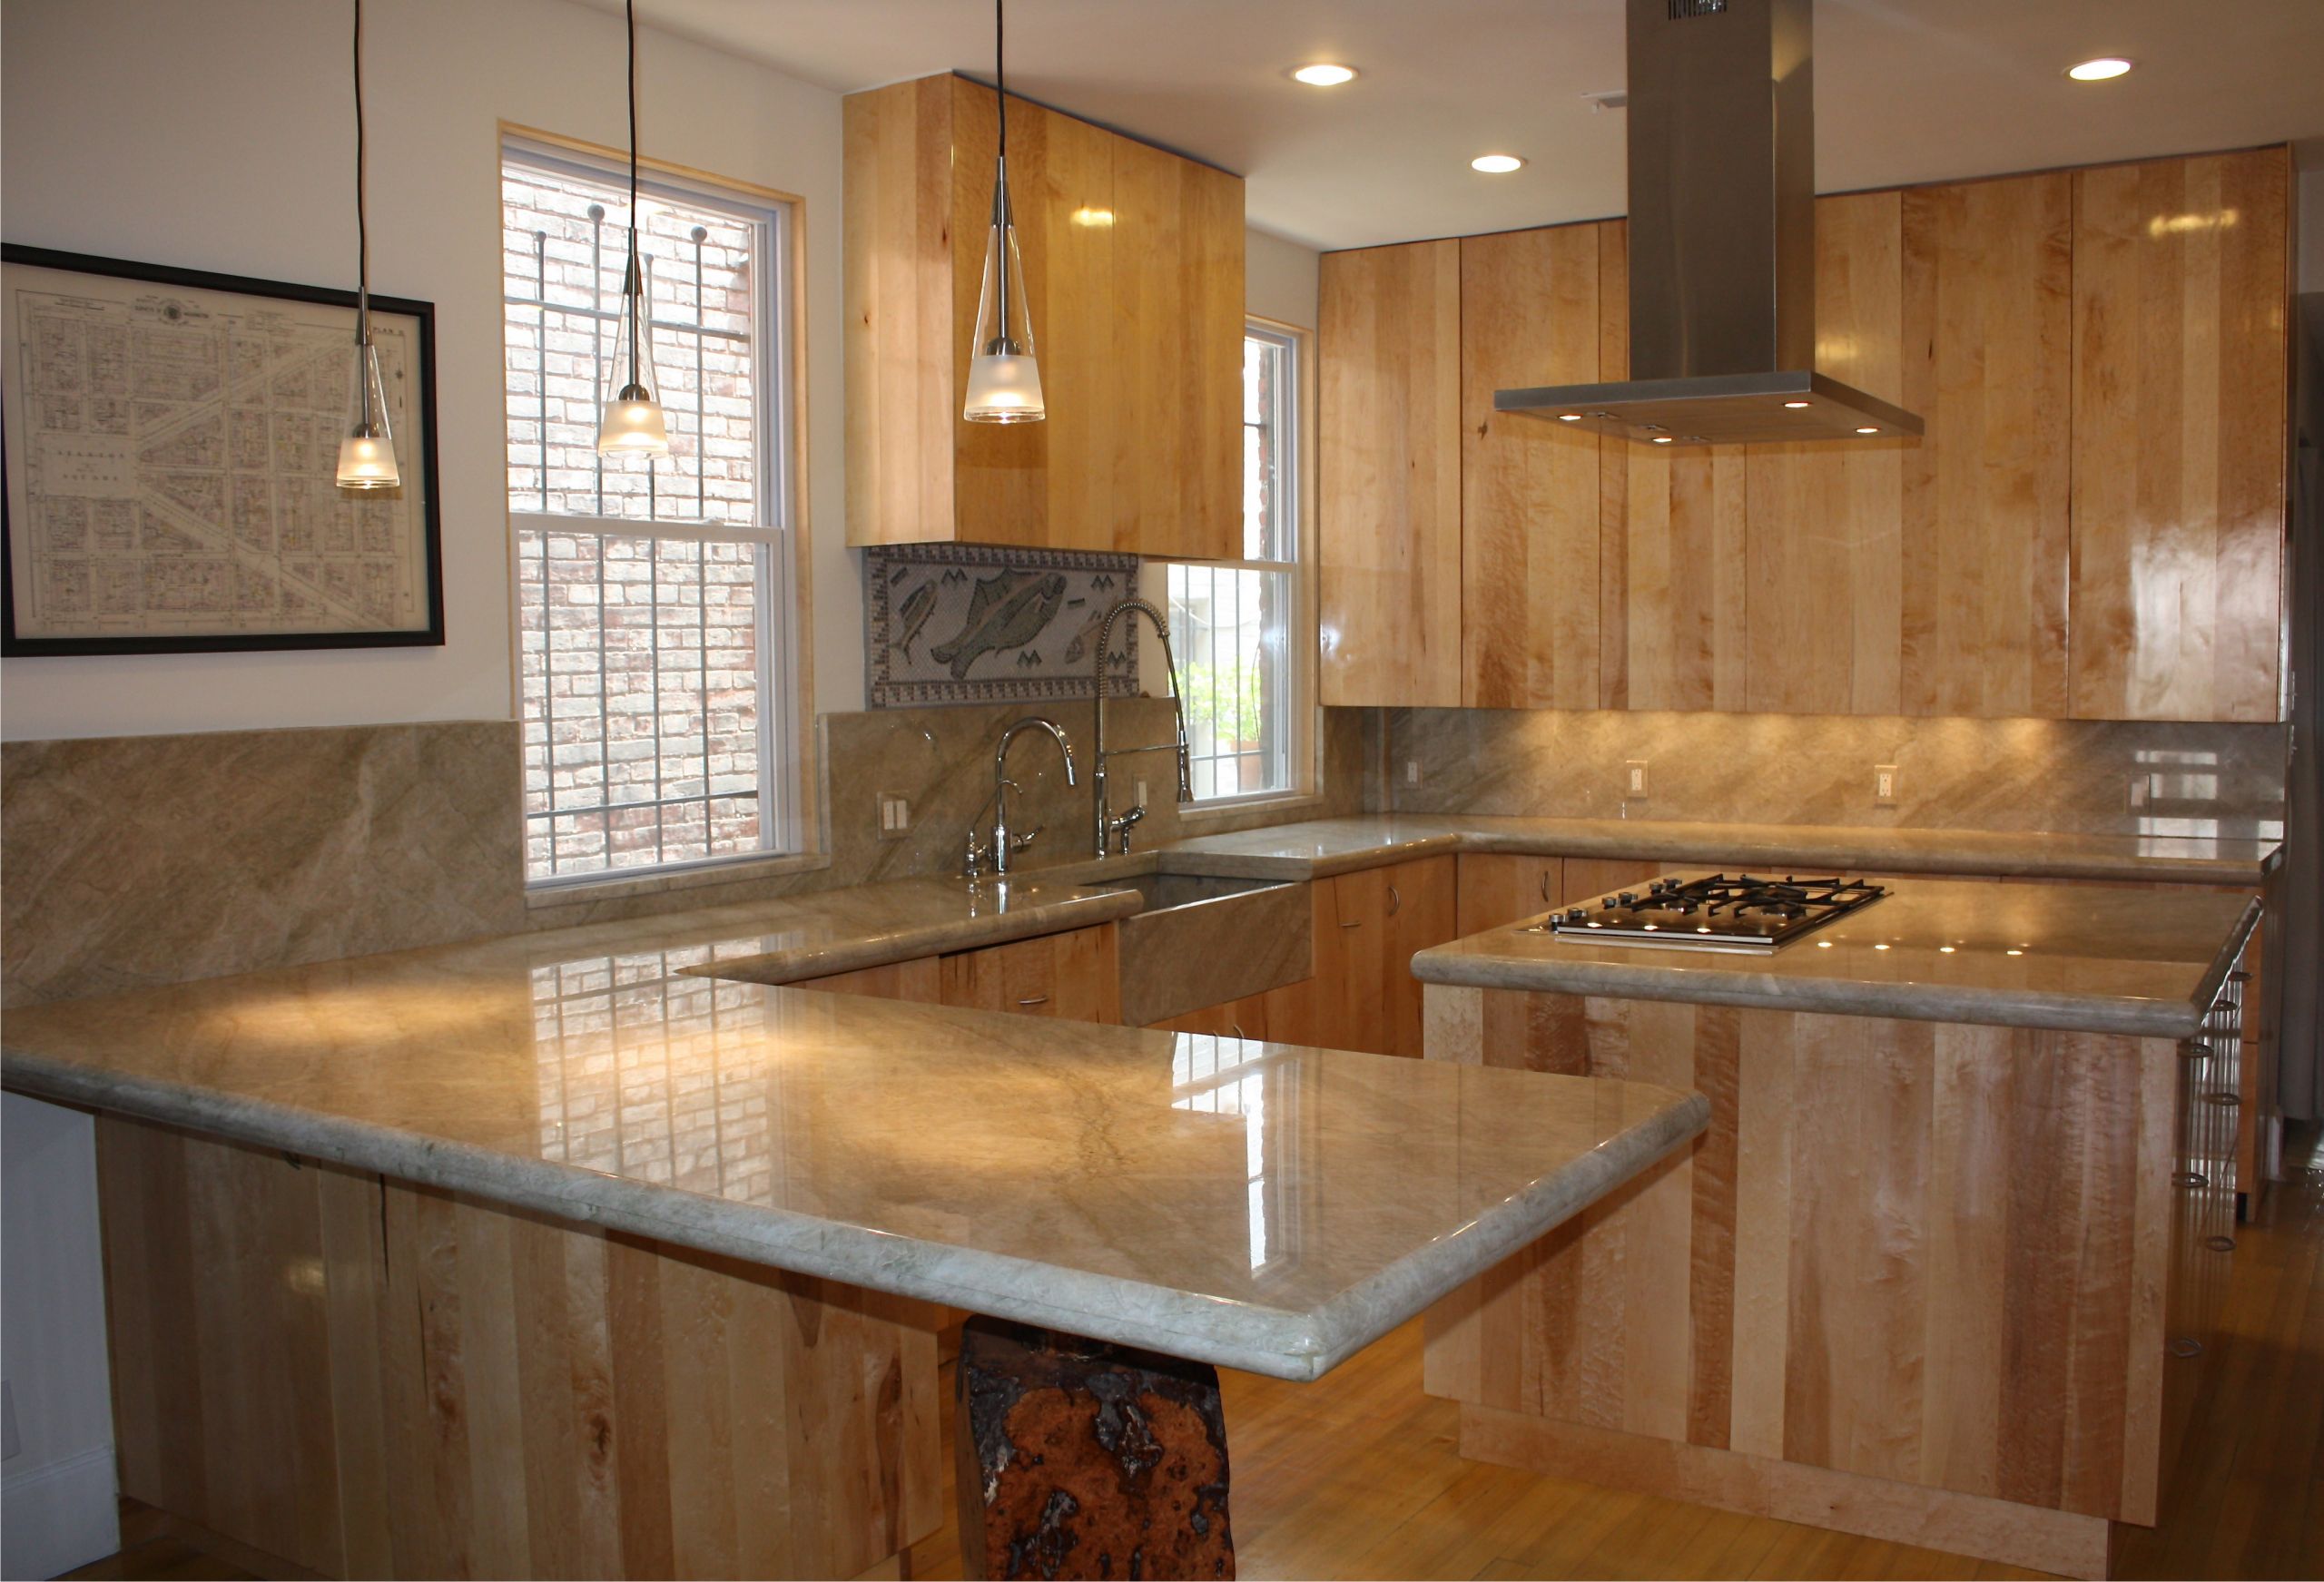 Kitchen Cabinet With Counter
 Kitchen Cabinets Phoenix Refinishing